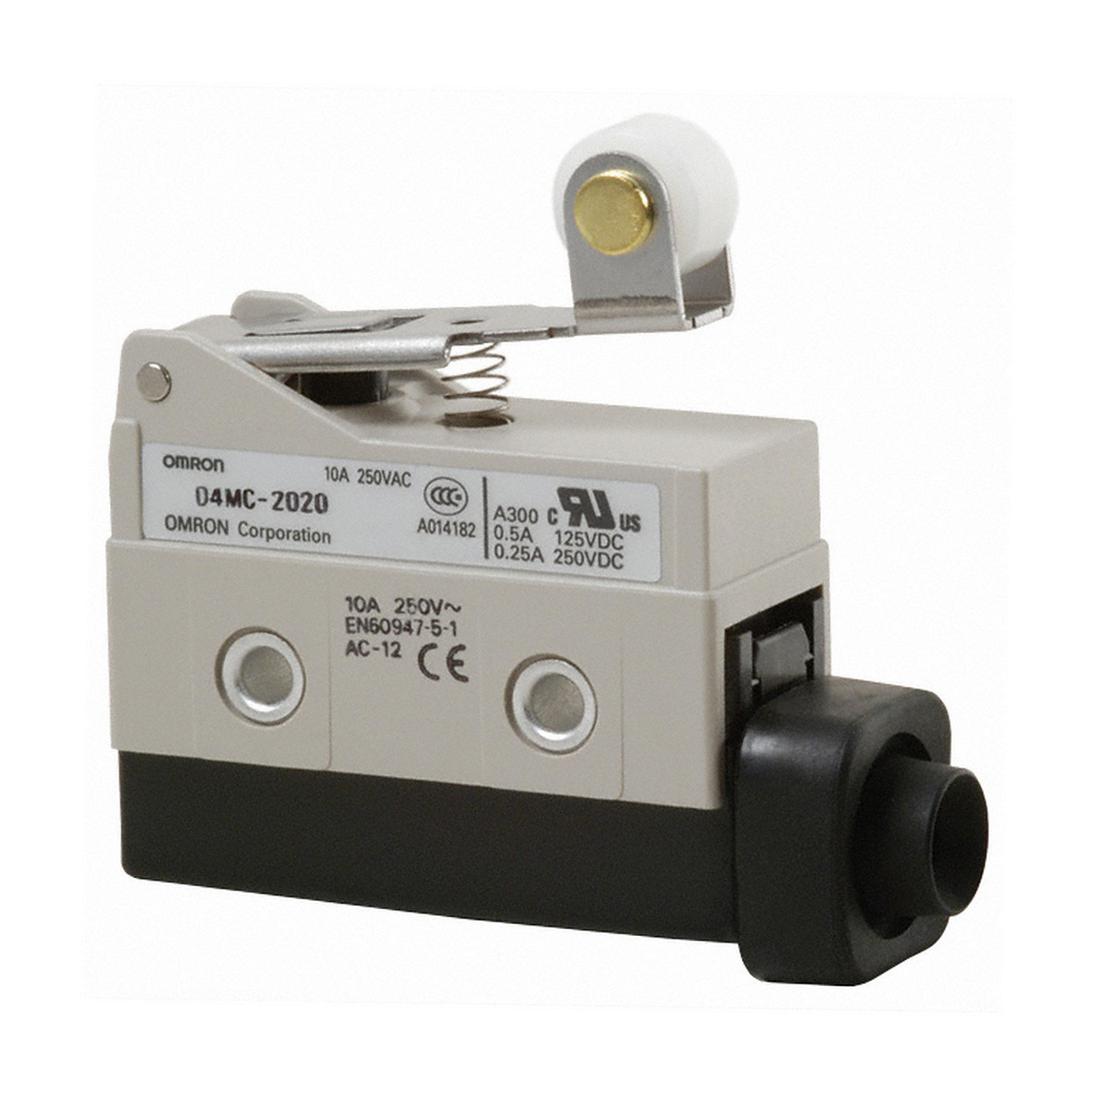 D4MC-2020 LIMIT SWITCH SWITCHES OMRON